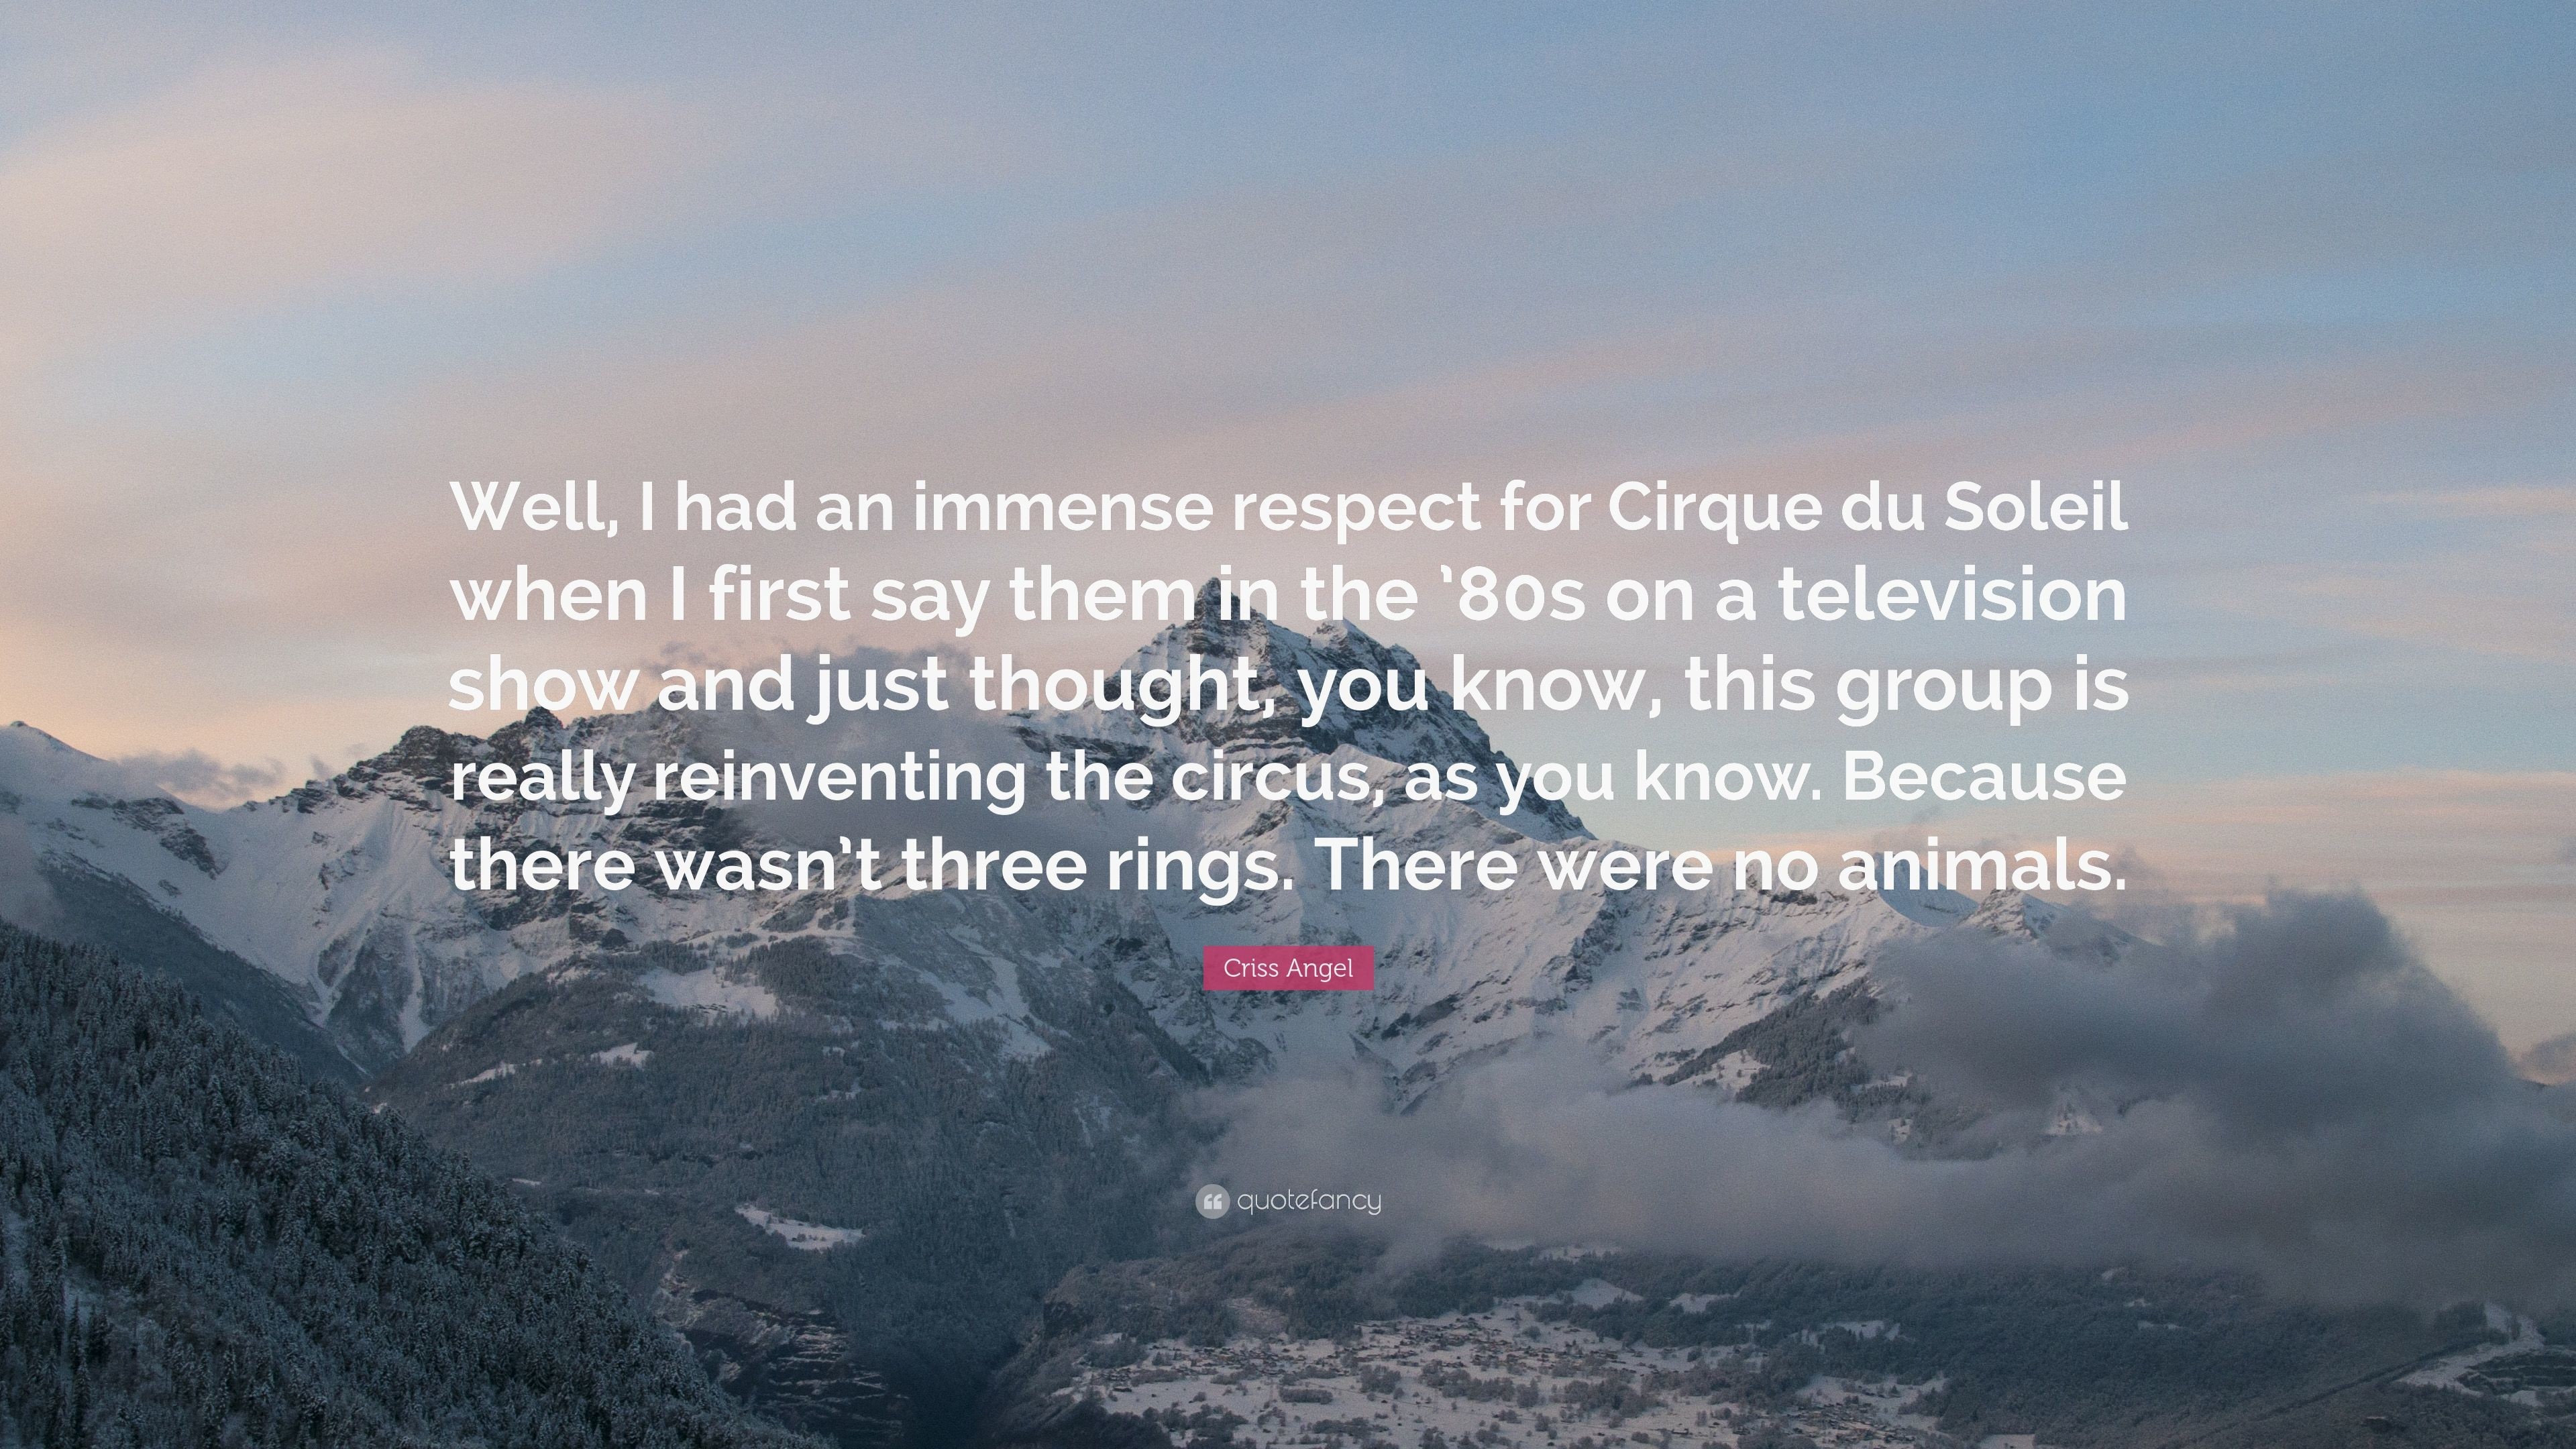 3840x2160 Criss Angel Quote: “Well, I had an immense respect for Cirque du Soleil